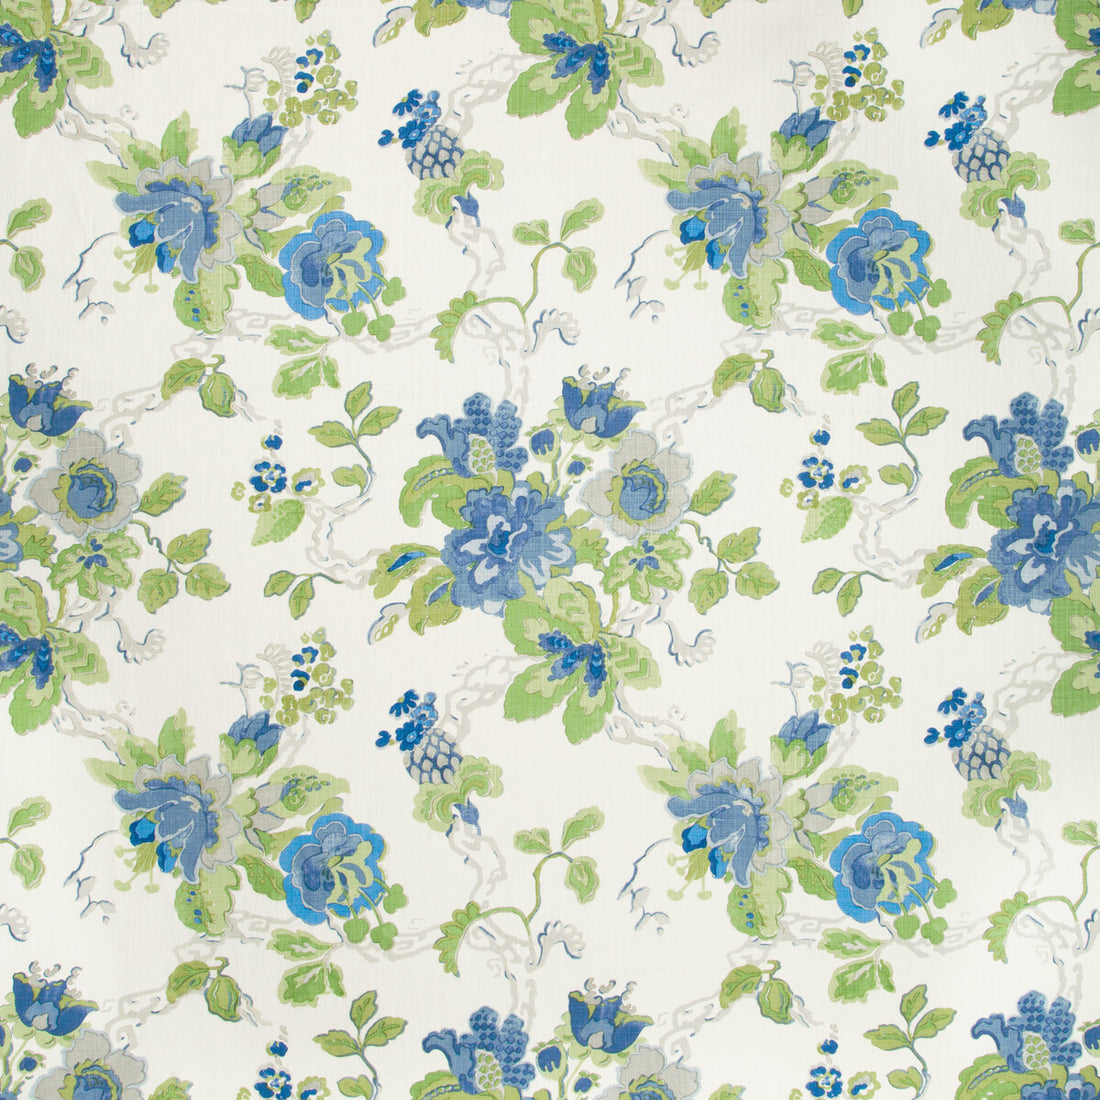 Parnham fabric in cornflower/lime color - pattern BFC-3520.153.0 - by Lee Jofa in the Blithfield collection